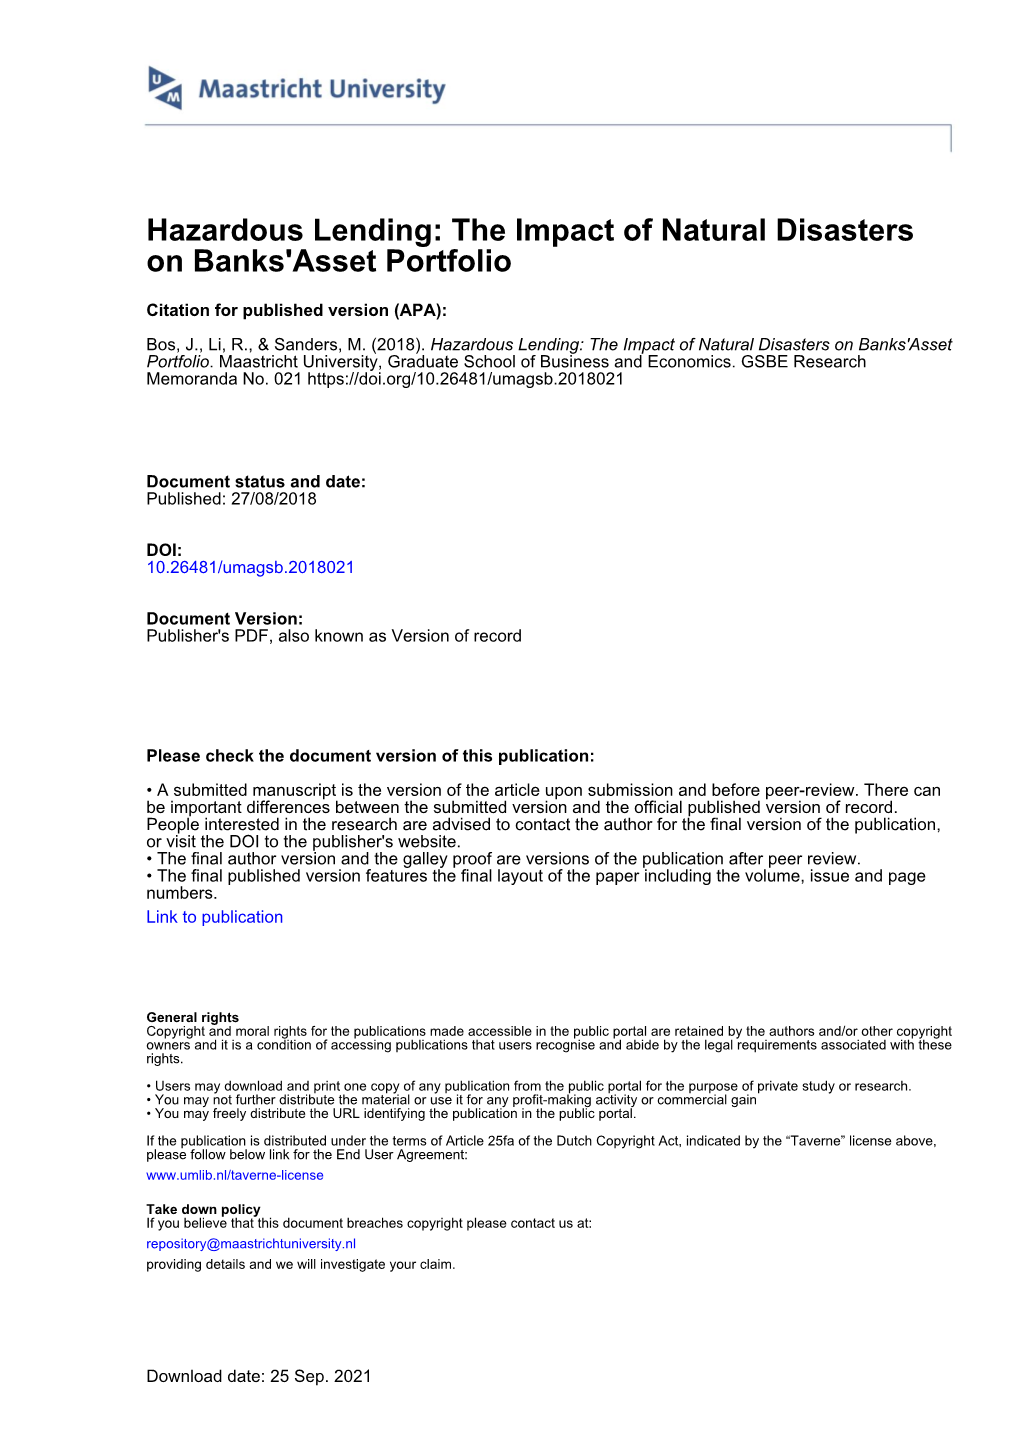 Hazardous Lending: the Impact of Natural Disasters on Banks' Asset